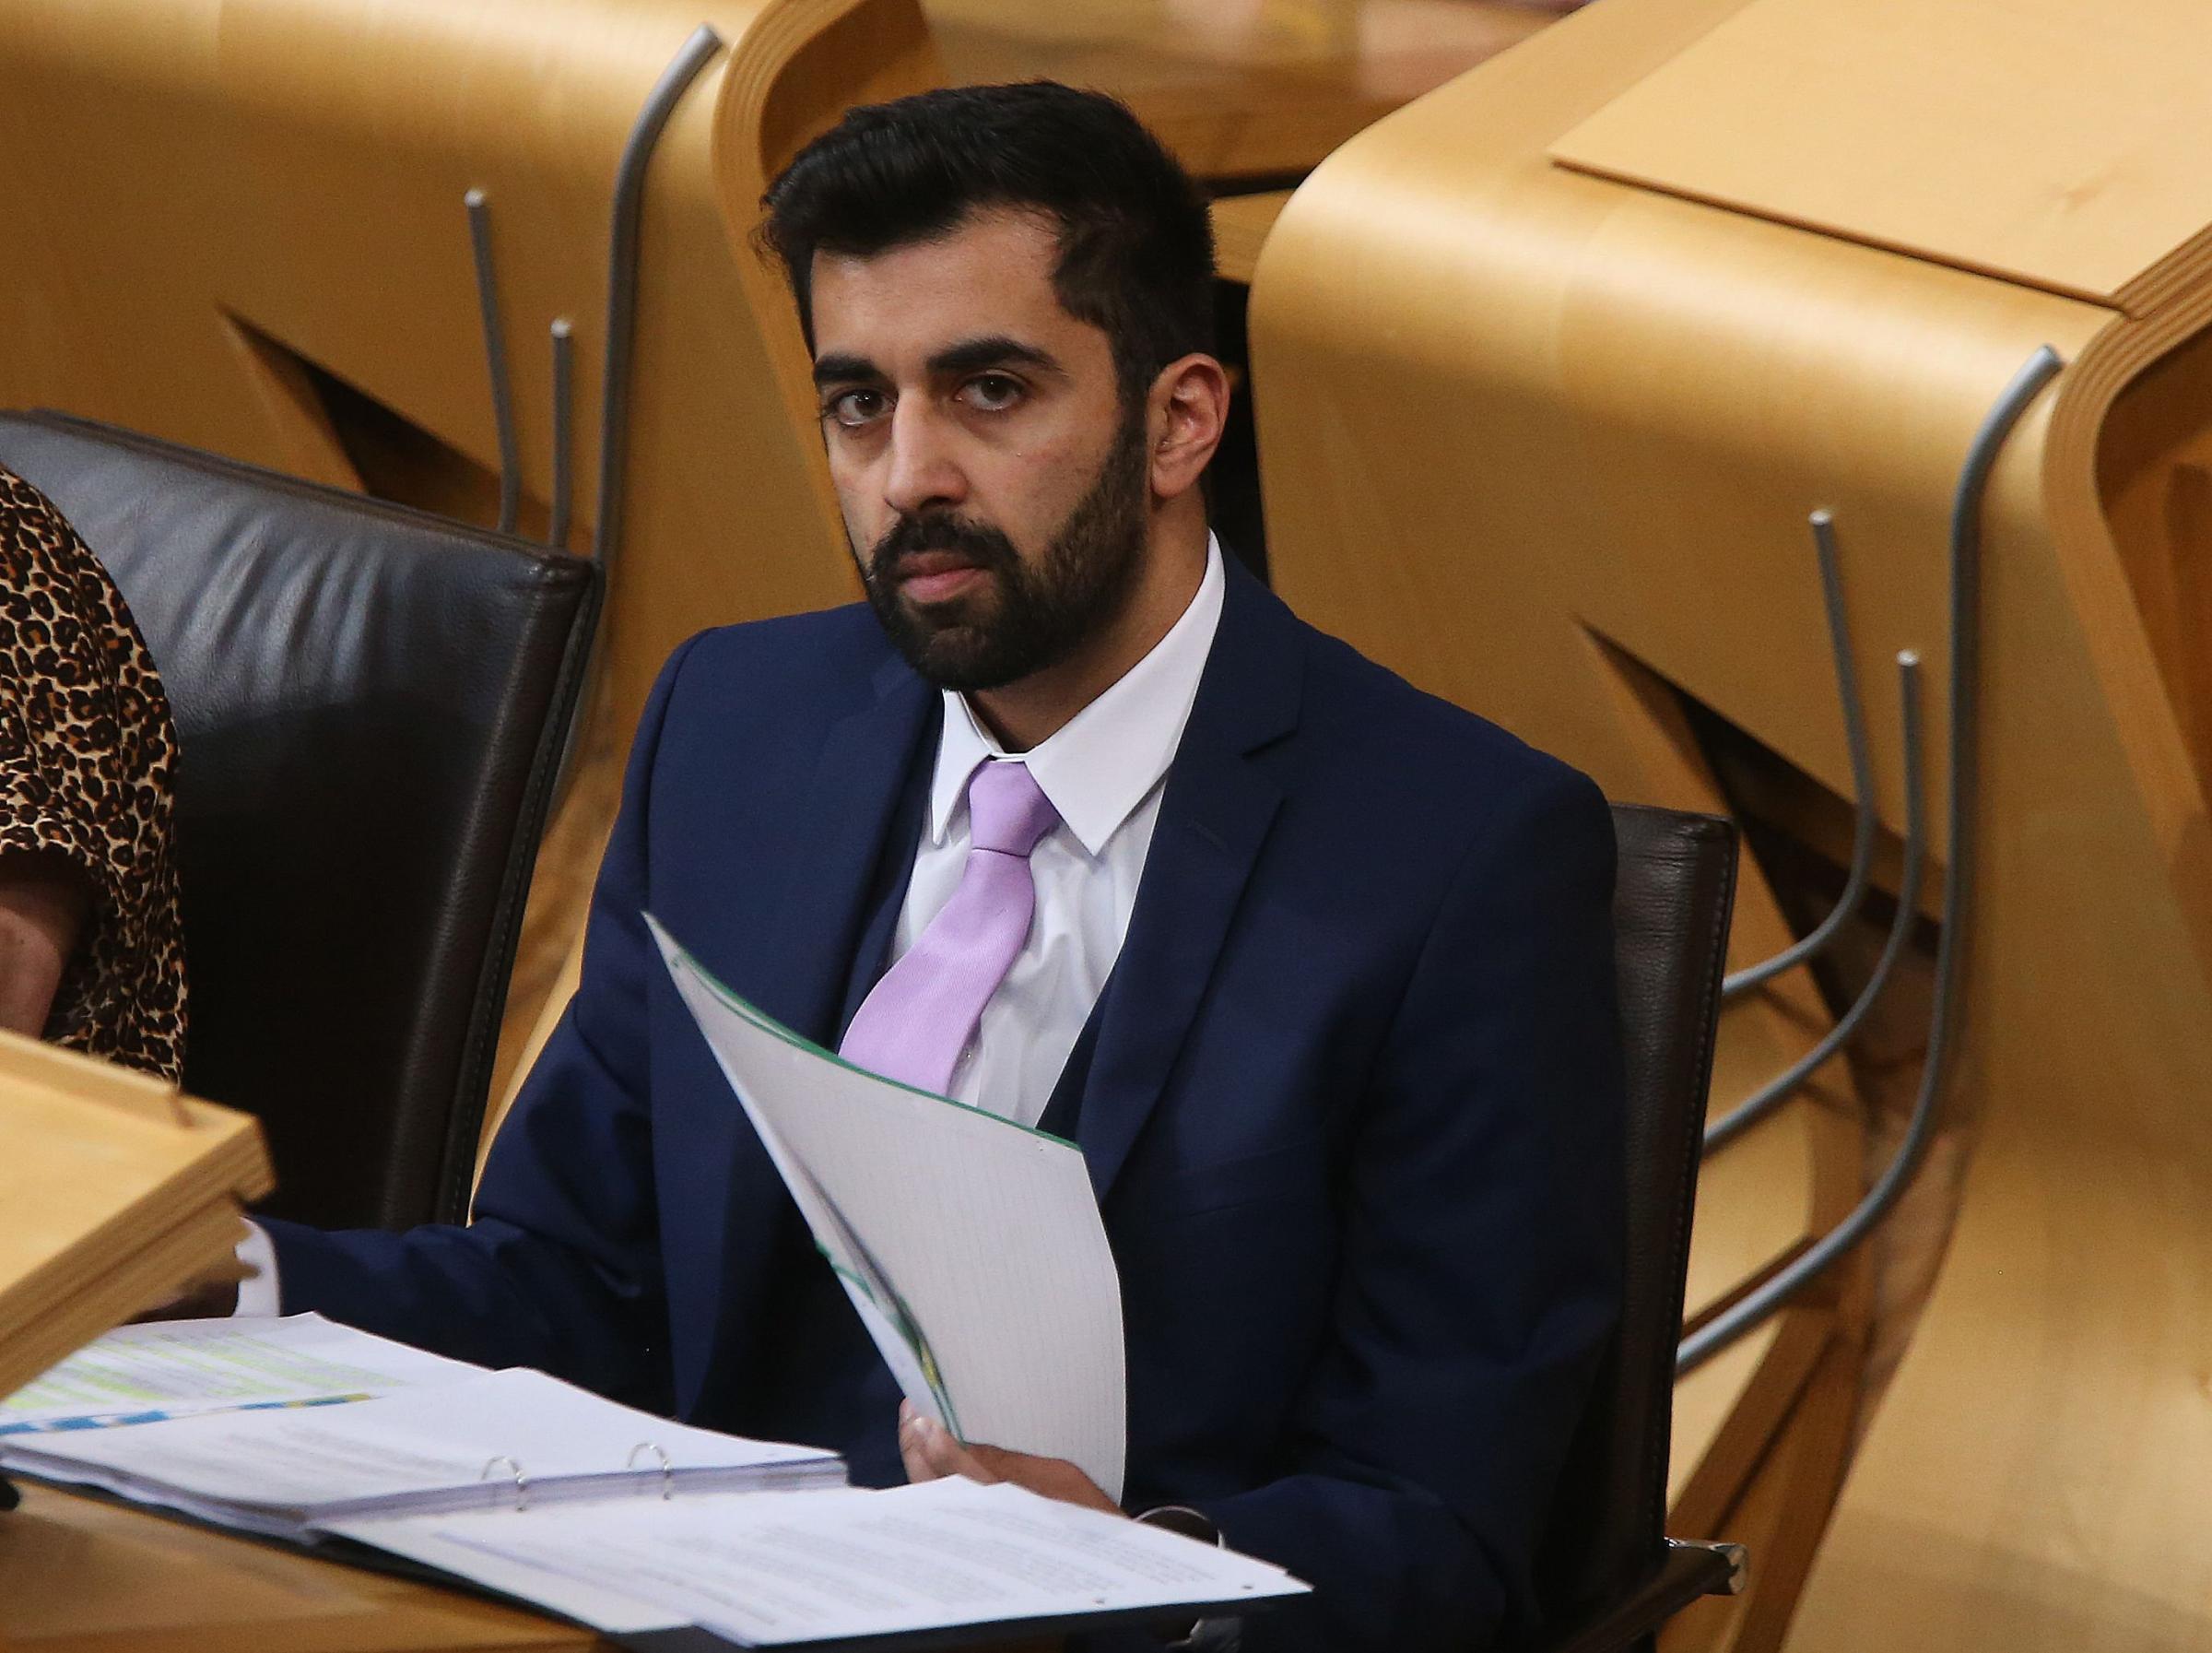 Humza Yousaf warns Euro 2021 Glasgow Green fan zone could be halted at any time